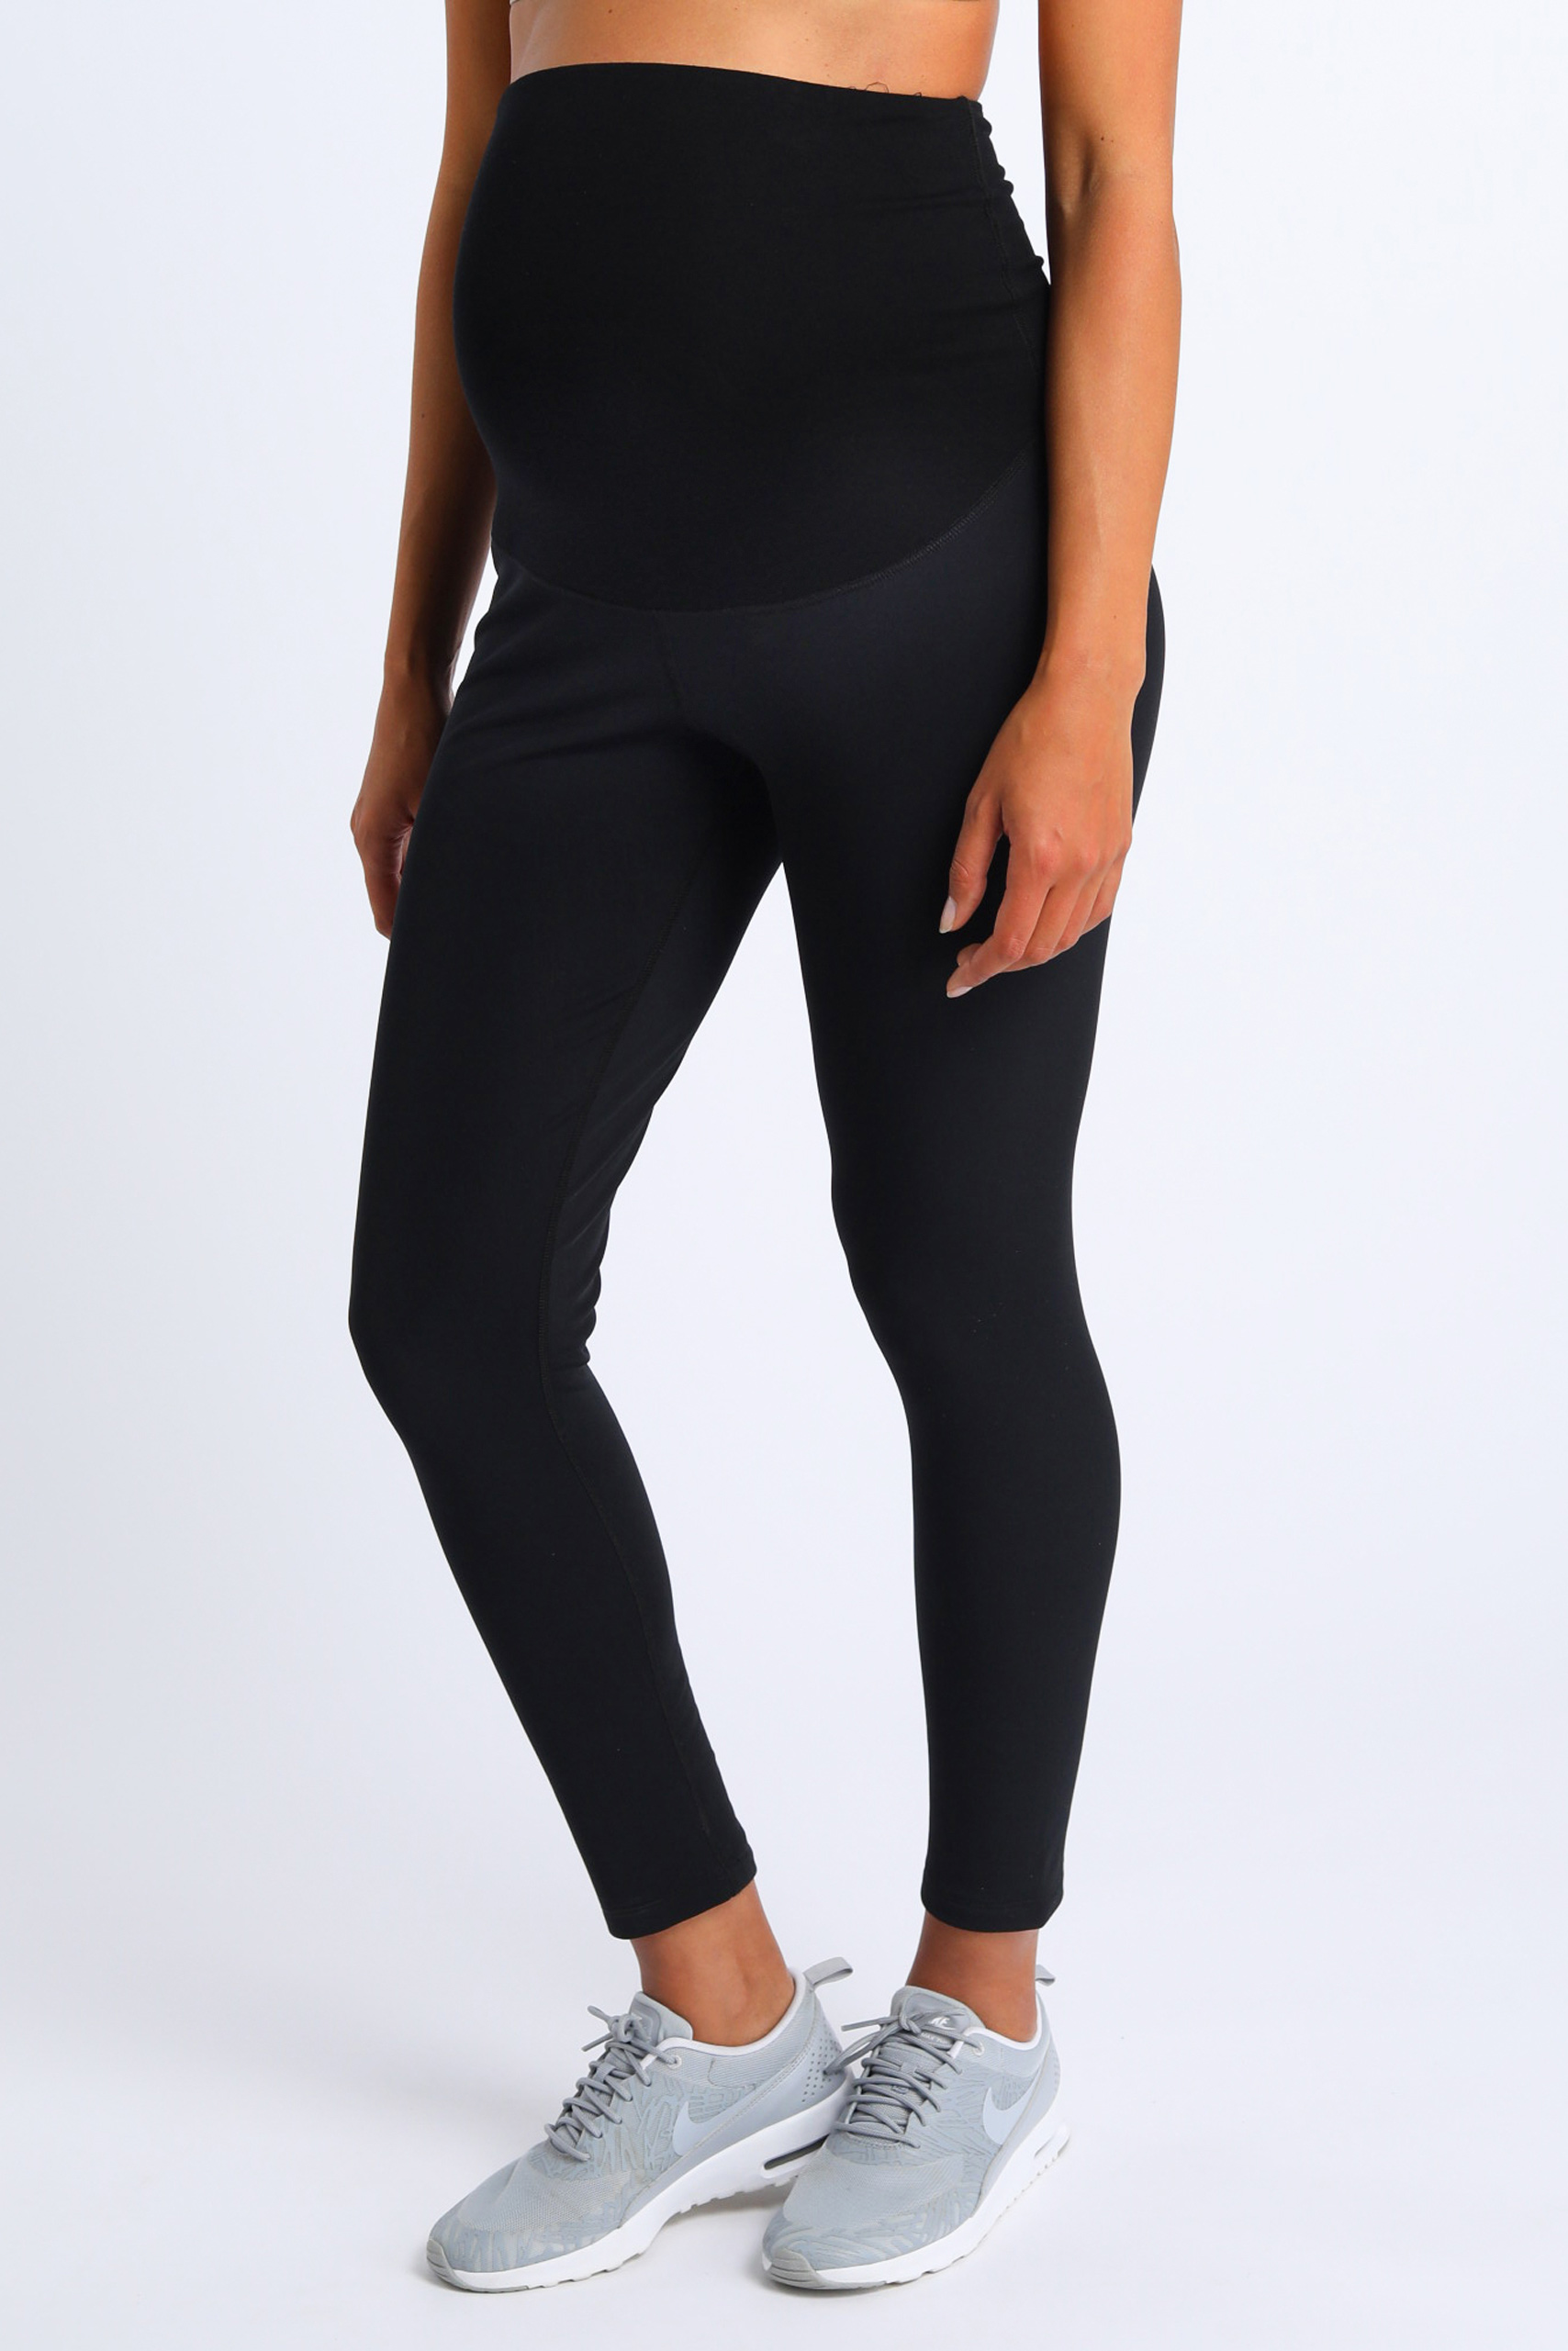 Wholesale thick winter maternity leggings For Comfort In